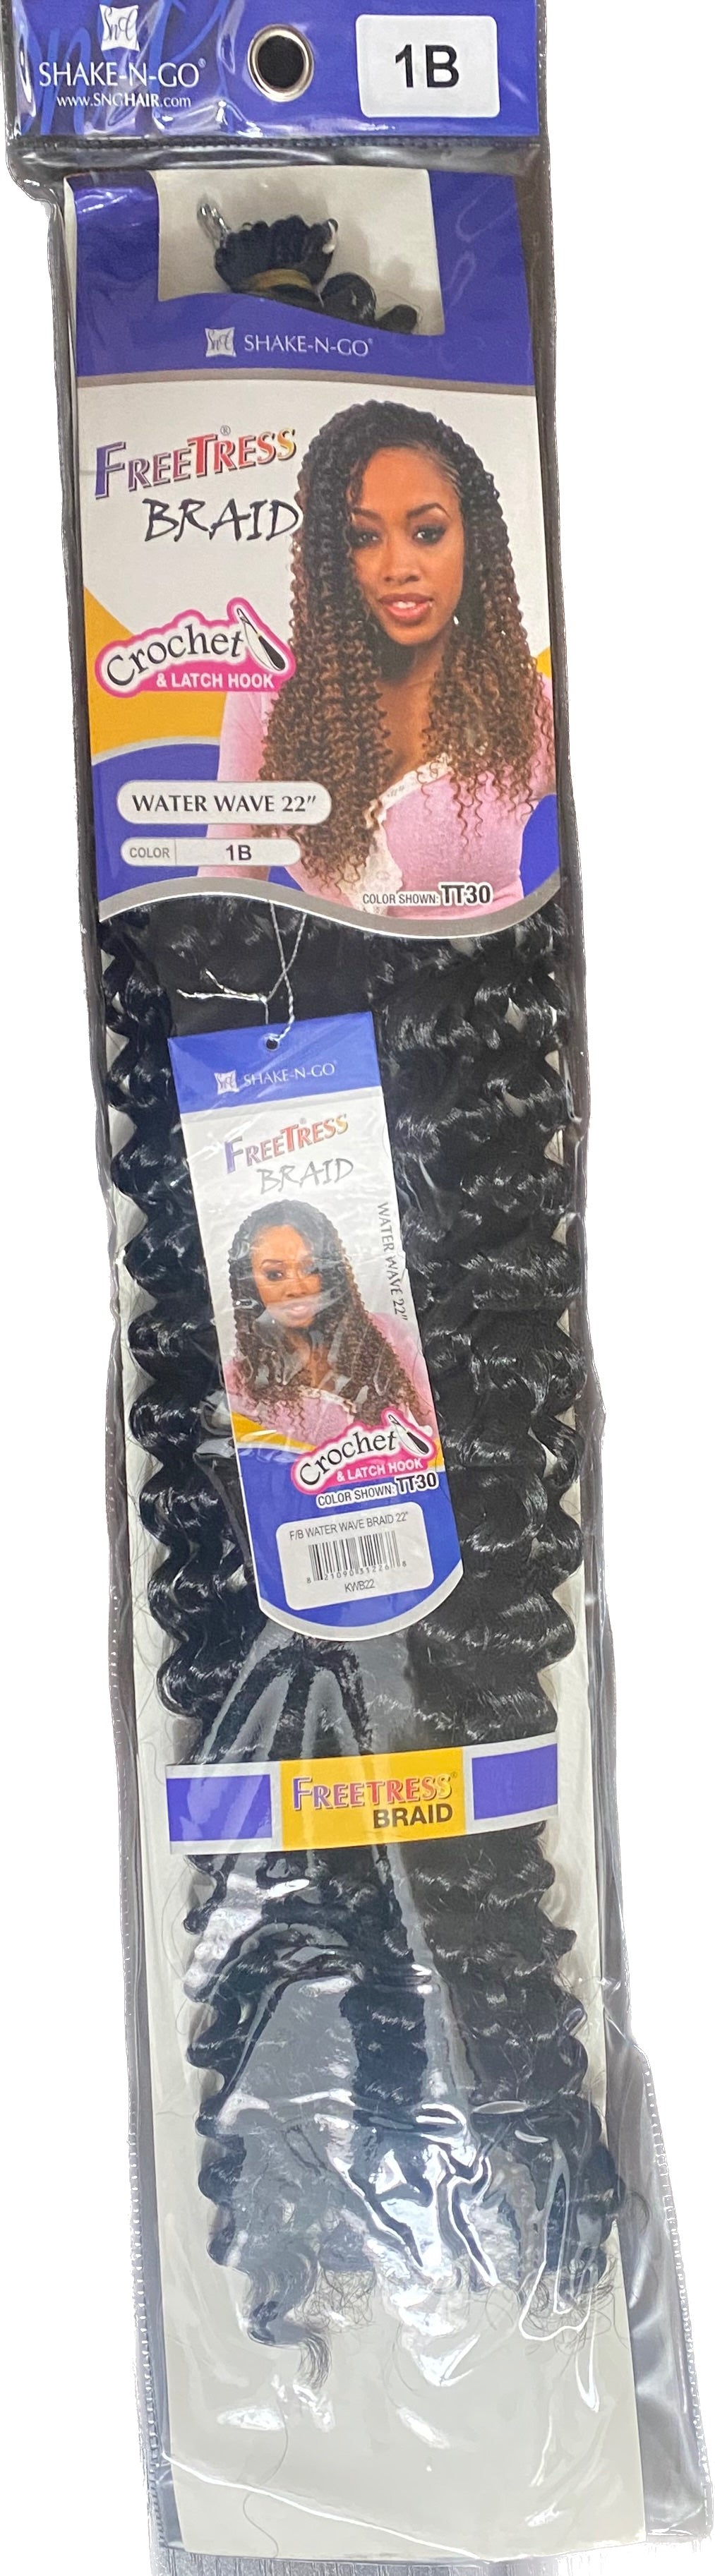 Freetress Synthetic Braiding Hair WATER WAVE BRAID 22"   Weight: 100g Style: Crochet Braiding hair Length: 22inch FREETRESS crochet hair Suitable Dying Colors: None Hair Weft: Machine Double Weft Chemical Processing: Dyed Hair Length: 22inch Hairstyle advantage: Hot style color 1B